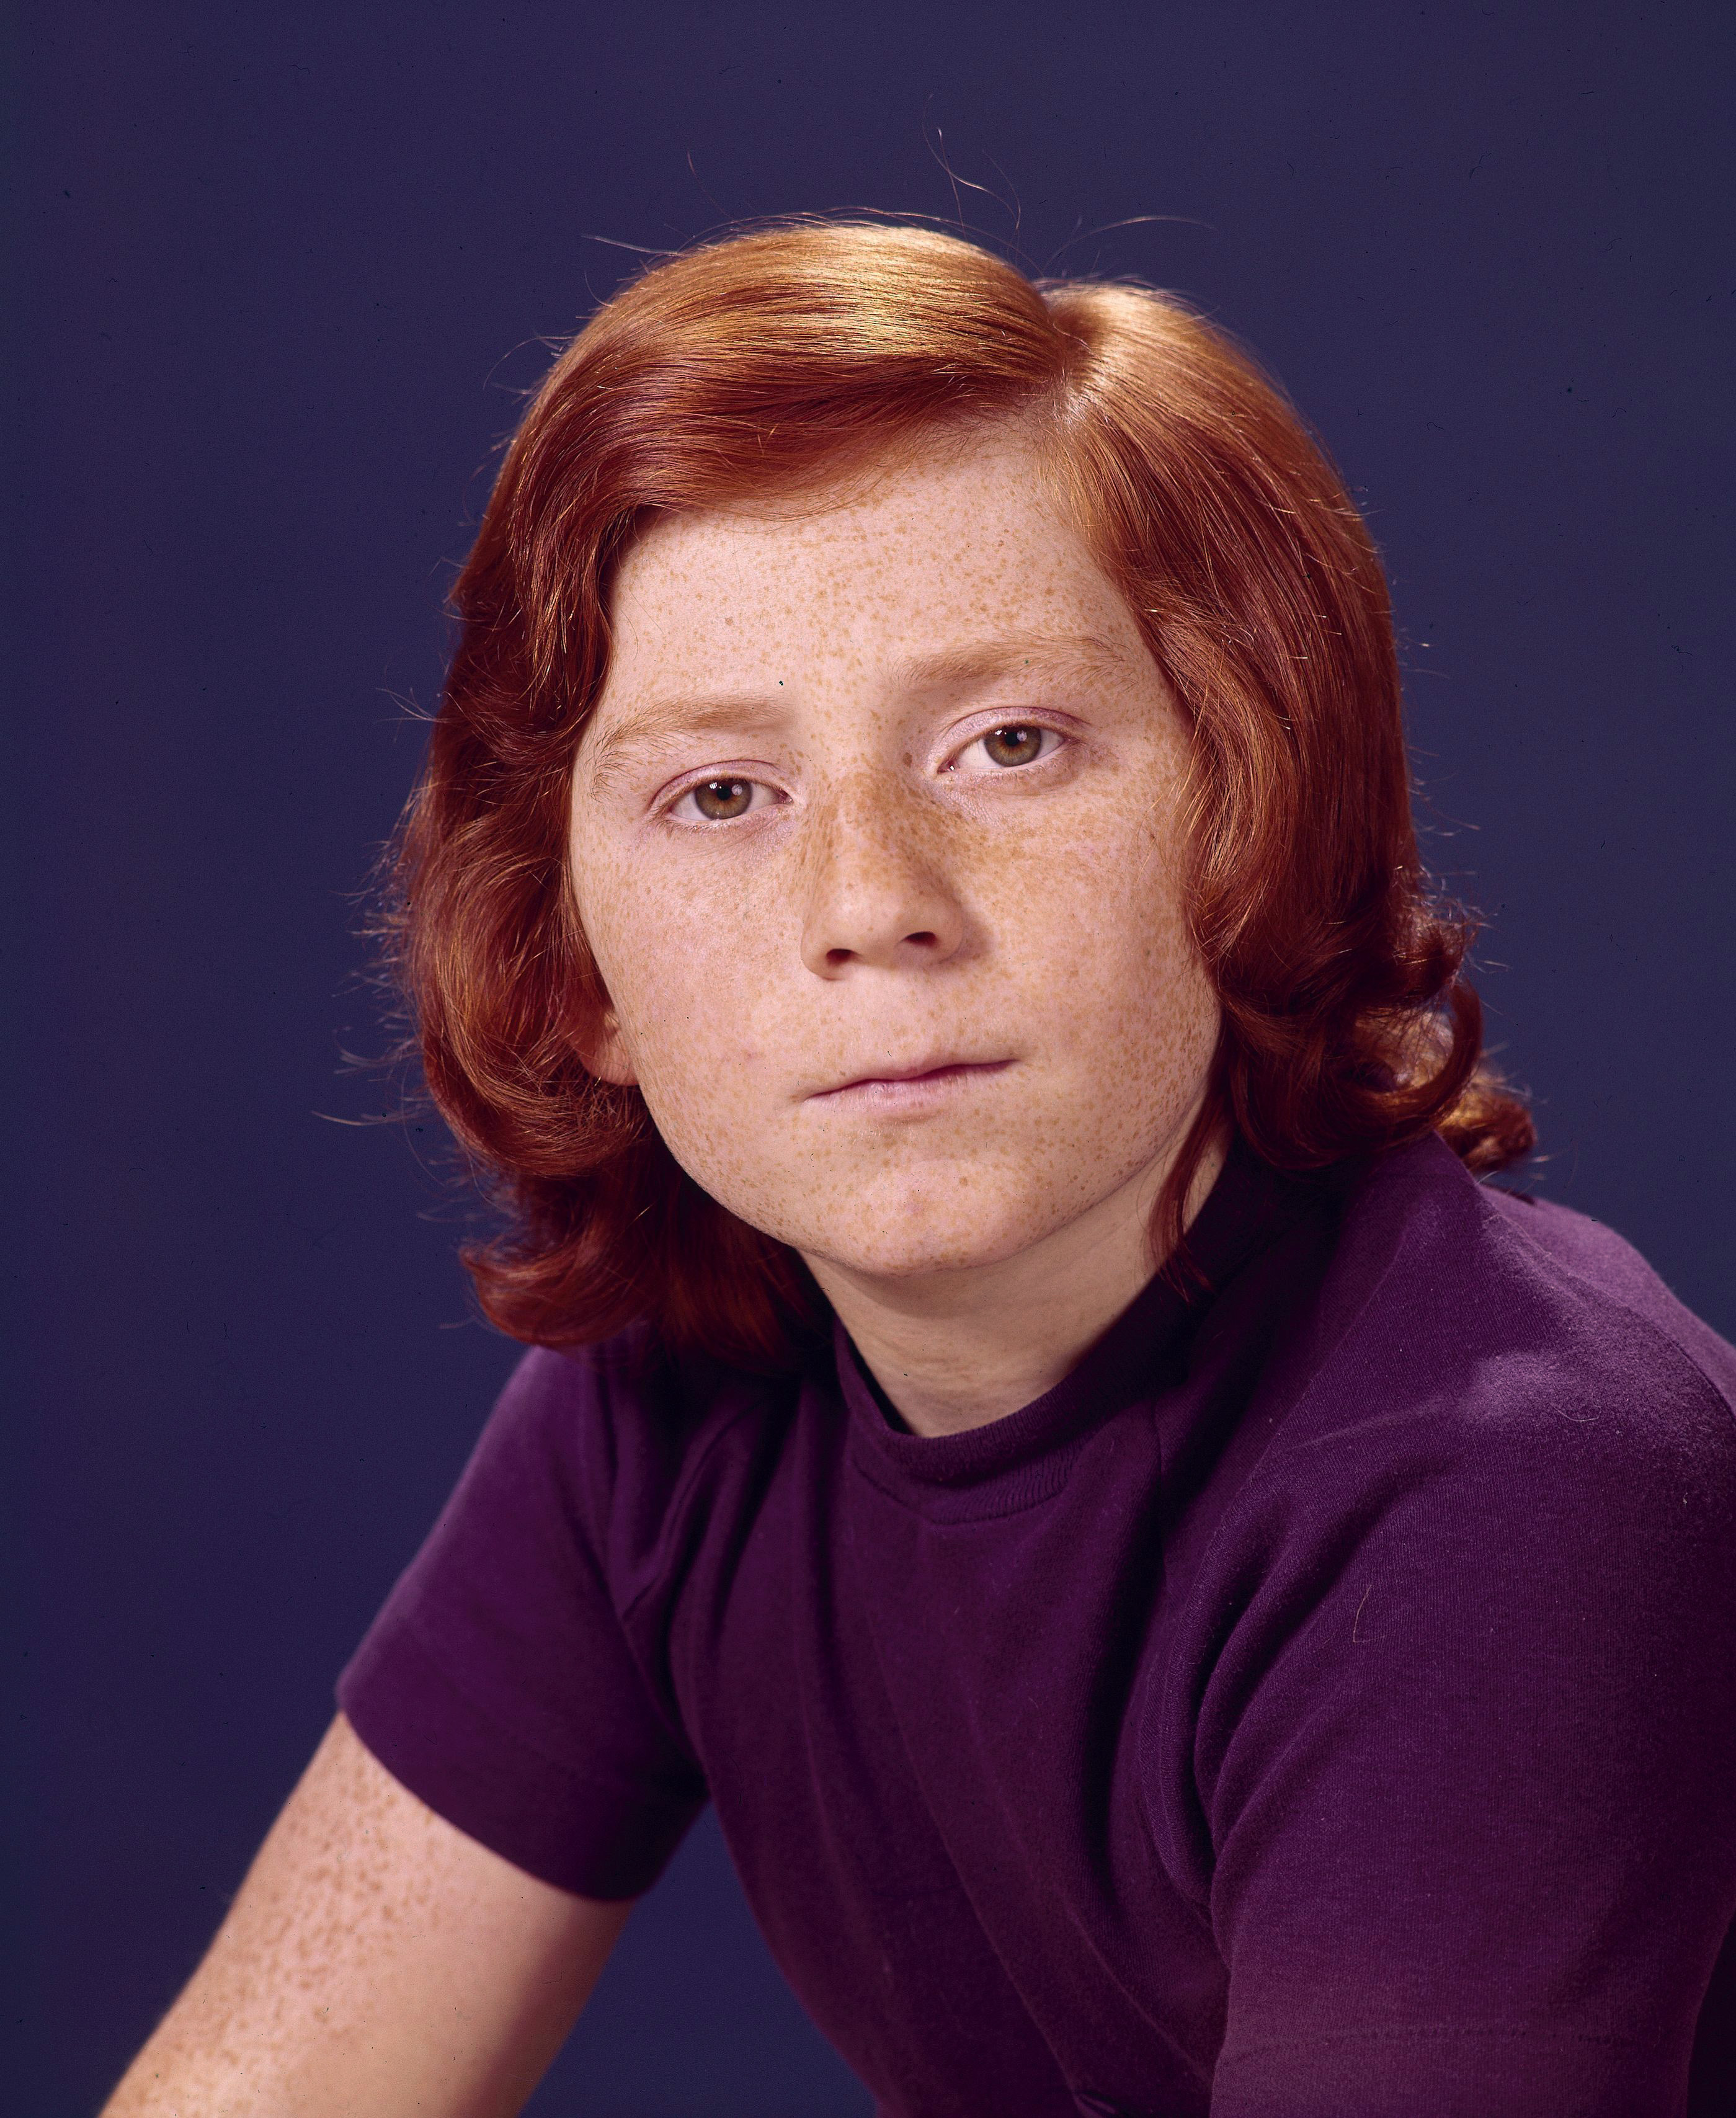 Danny Bonaduce photographed as Danny Partridge in "The Partridge Family" on May 14, 2008 | Source: Getty Images